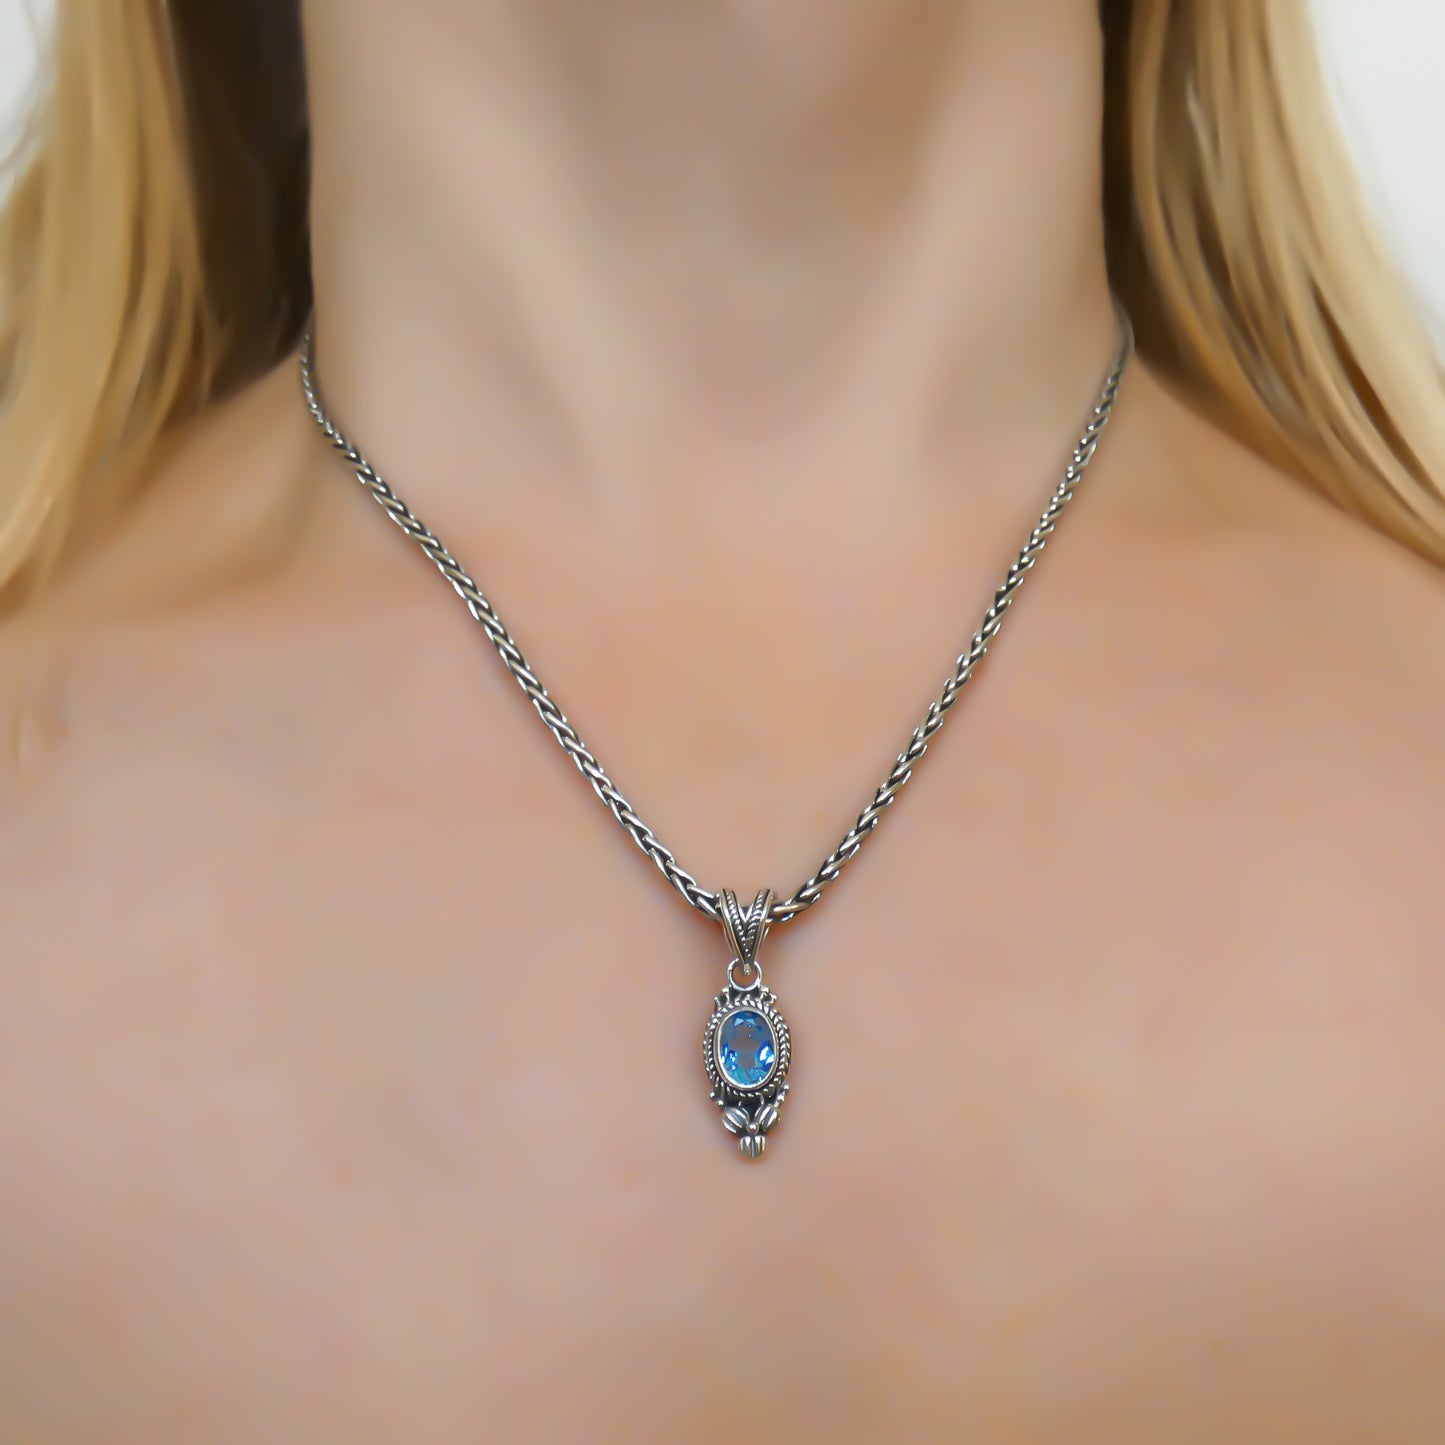 P012BT PADMA .925 Sterling Silver Pendant with 6x8mm Swiss Blue Topaz